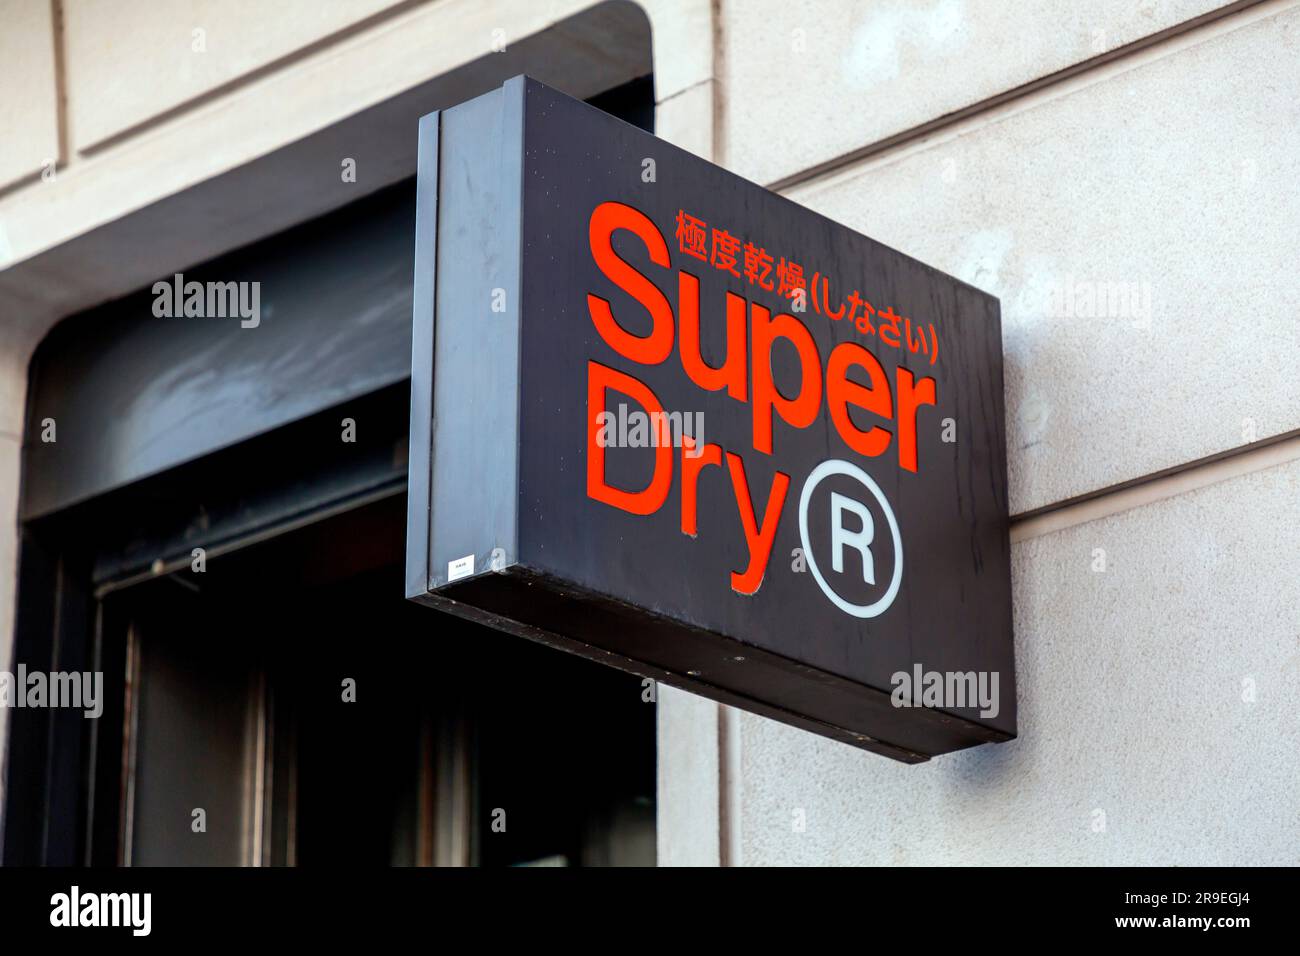 What the Japanese characters on Superdry gear really mean